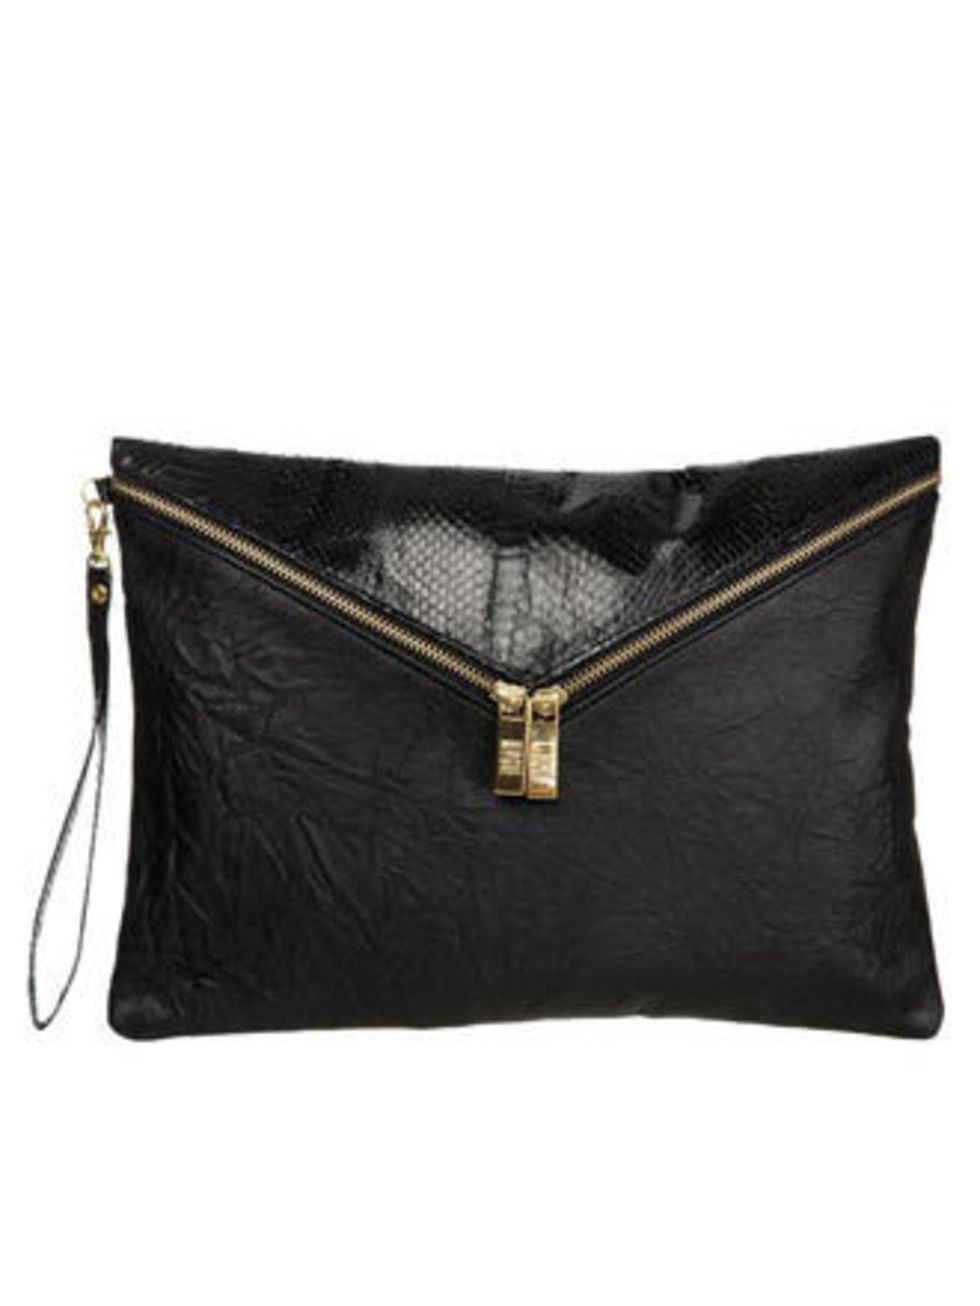 <p>Leather clutch, £98 by Mogil at <a href="http://www.bunnyhug.co.uk/fashionshop/gbu0-prodshow/Mogil_Black_Washed_Leather_and_Snake_Detail_Super_Size_Witch_Envelope_Clutch.html">Bunnyhug</a></p>